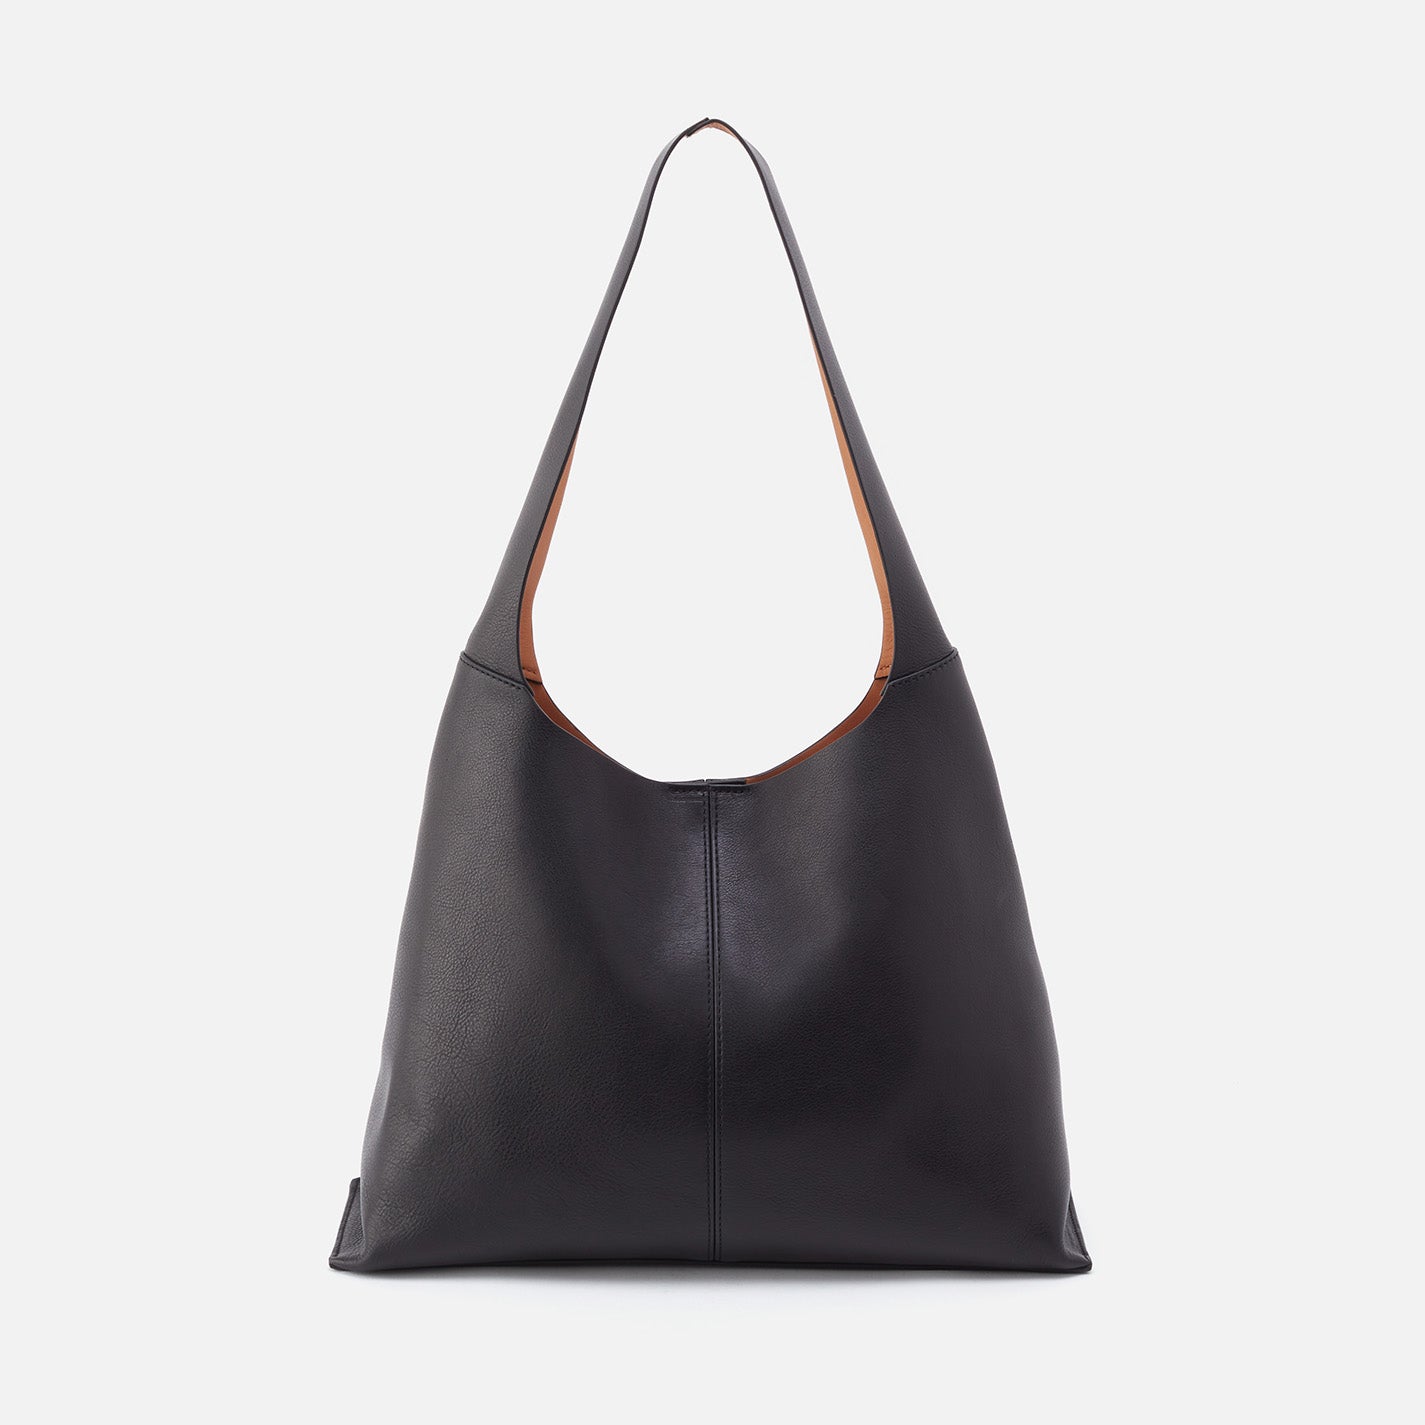 15 Trendy Designs of Hobo Bags for Women in Different Sizes